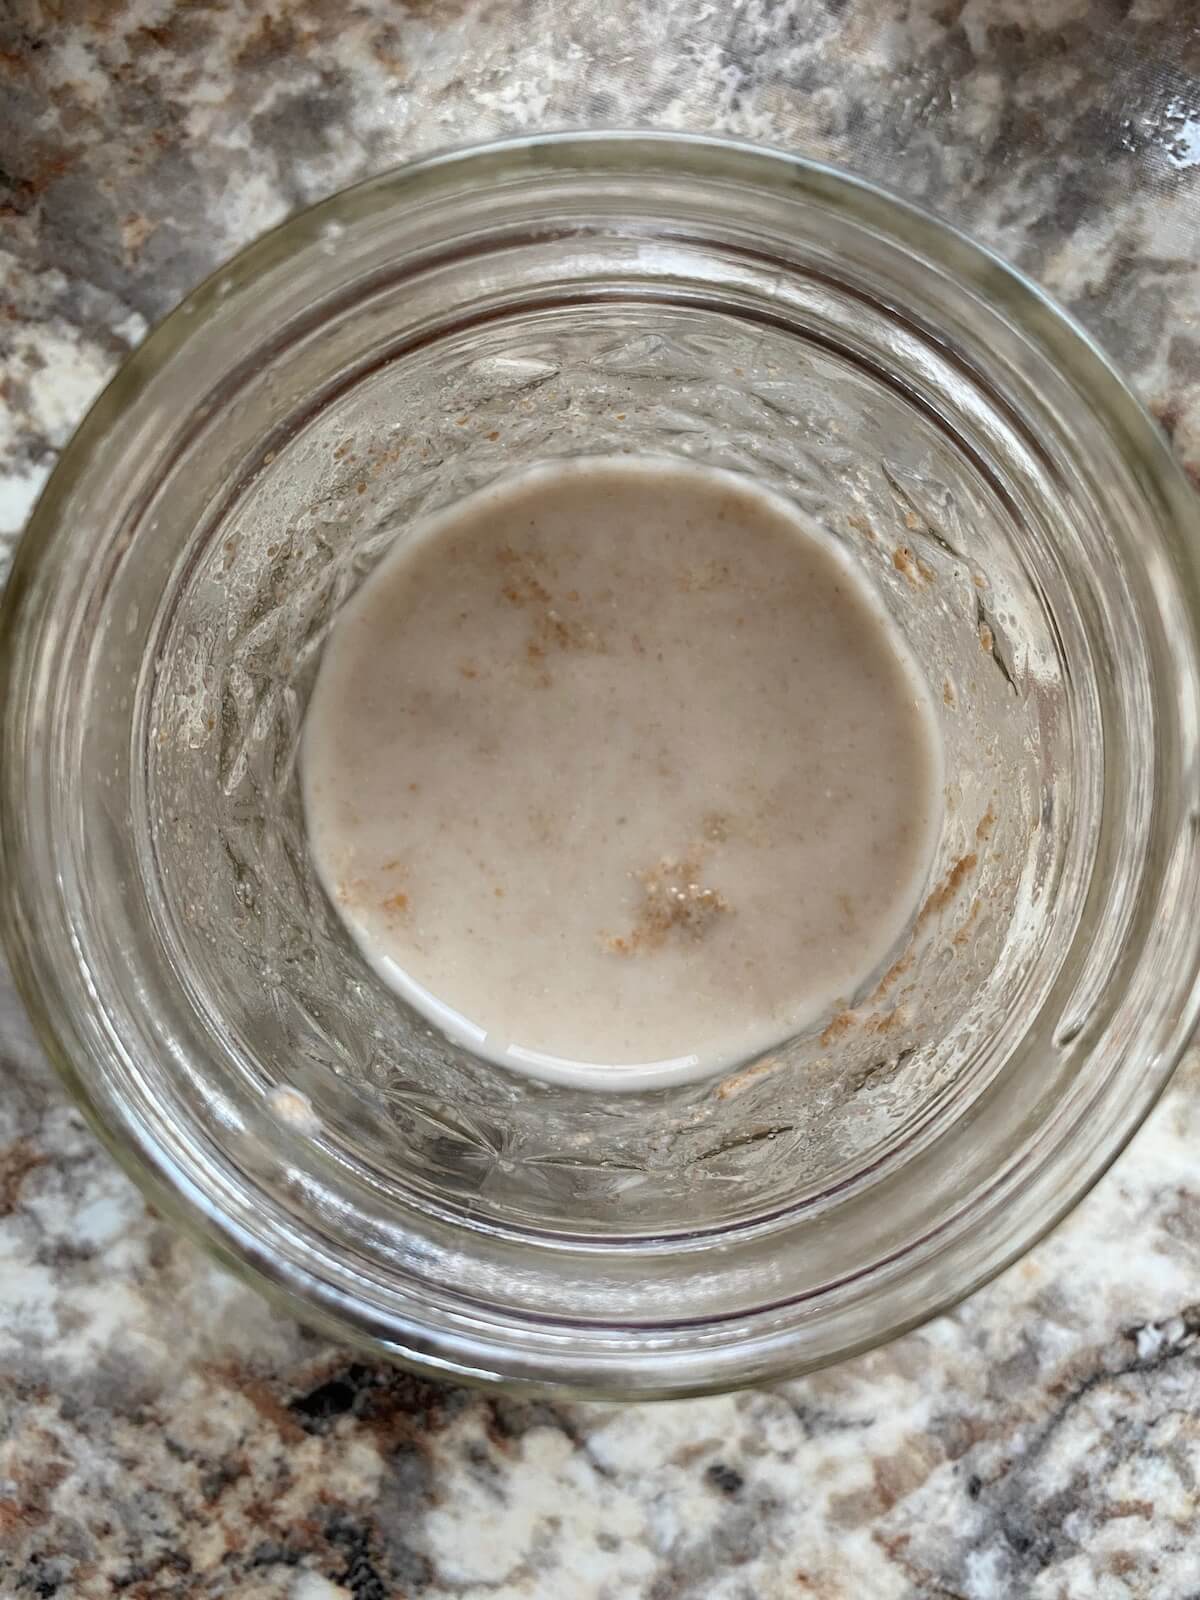 Sourdough starter mixed with warm water in a small glass jar.